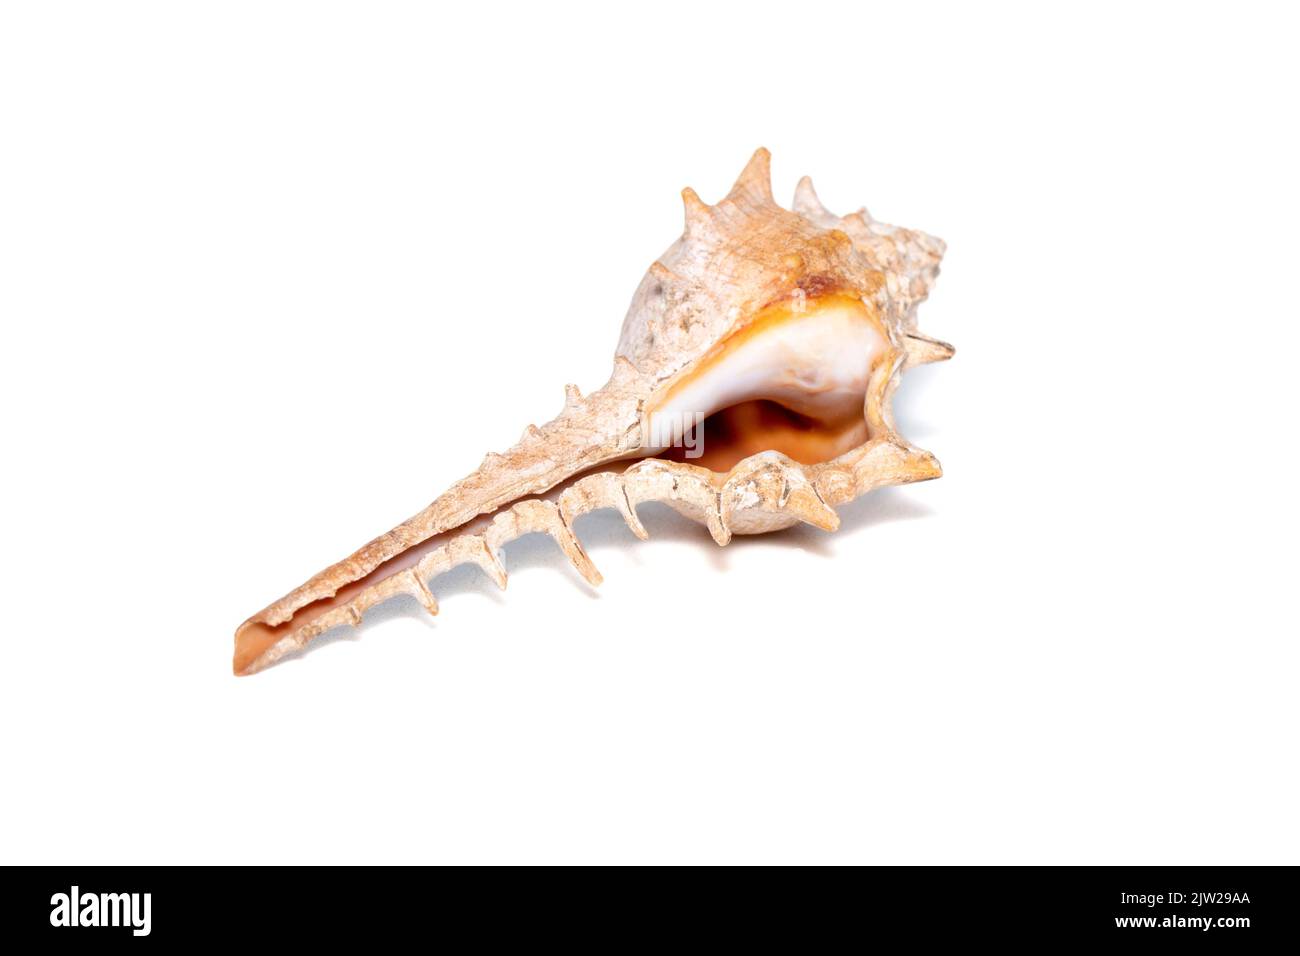 Image of thorn conch shell (murex trapa) on a white background. Undersea Animals. Sea shells. Stock Photo